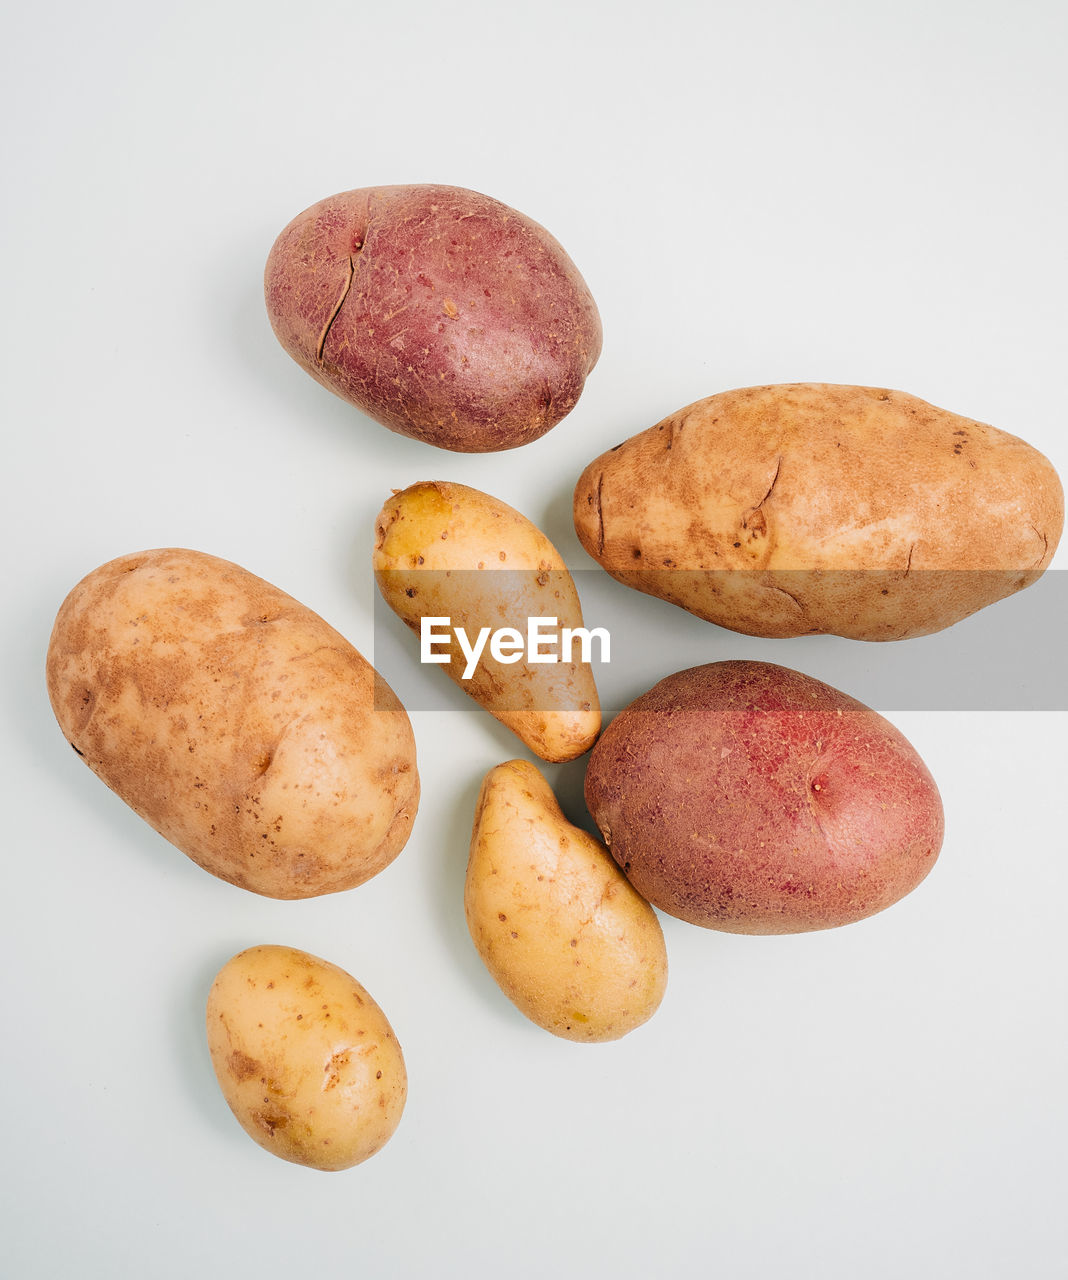 High angle view of three kinds of potatoes on white background